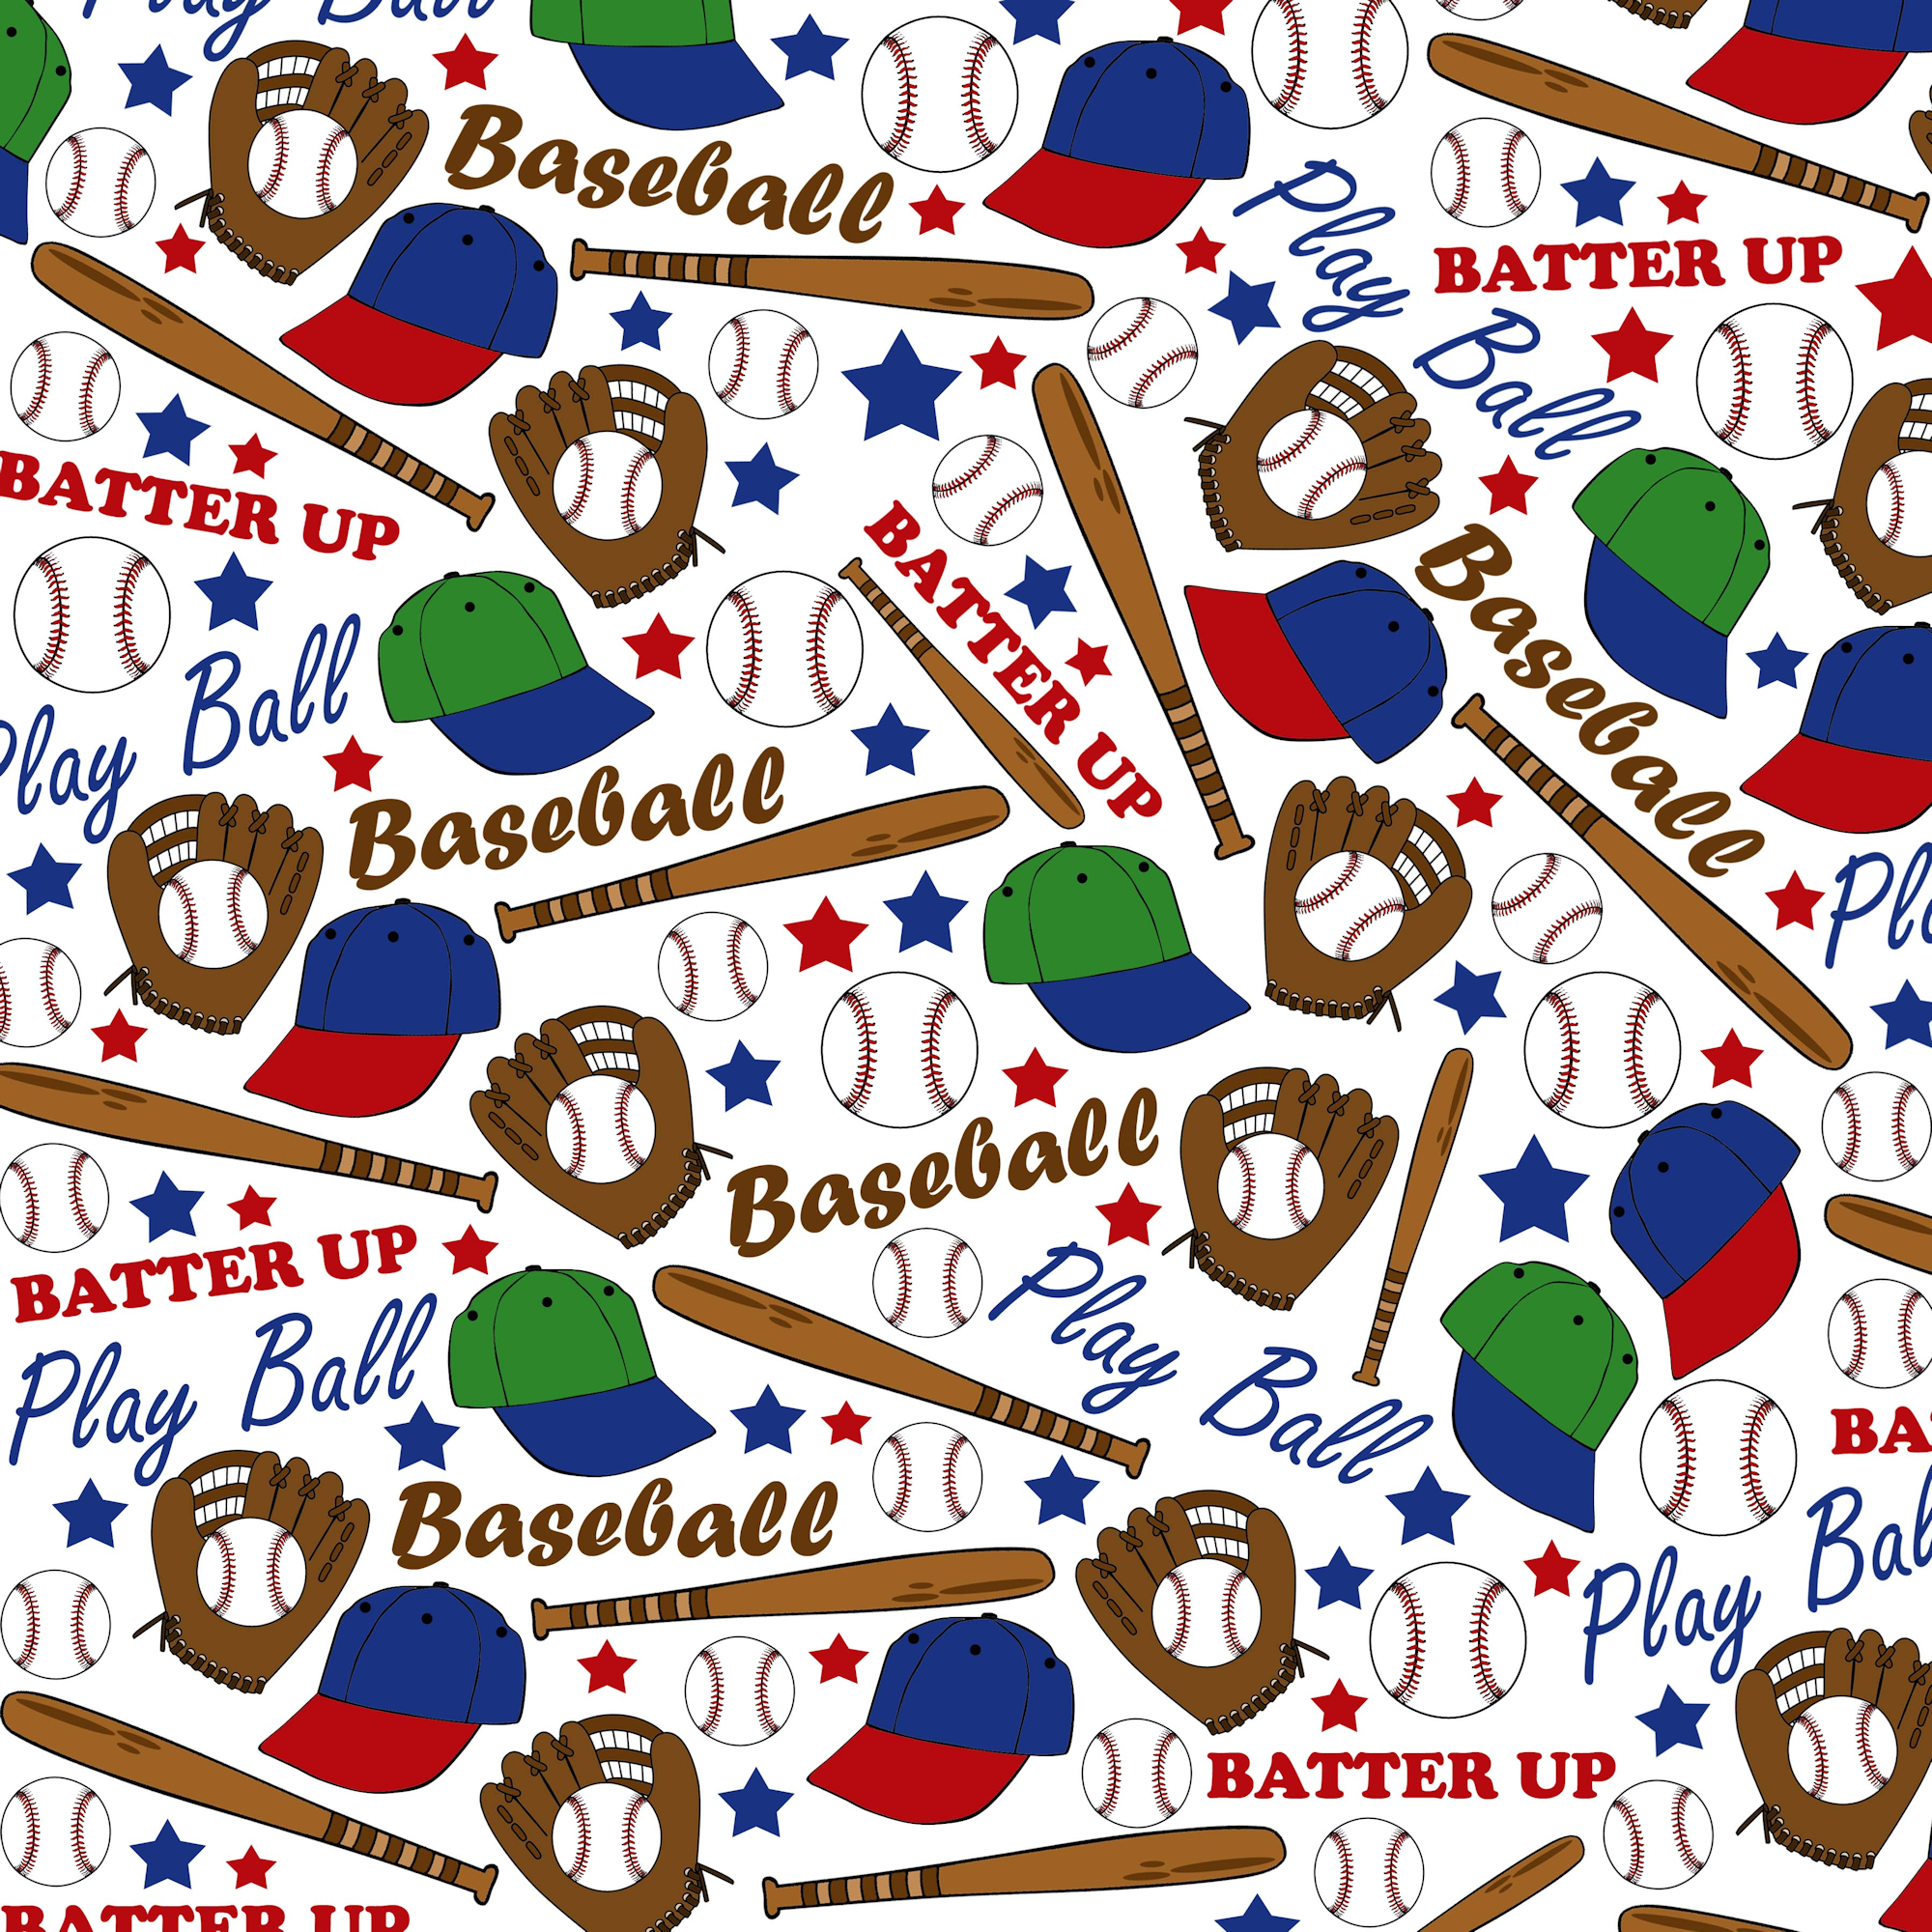 Sports Beat Collection Play Ball 12 x 12 Double-Sided Scrapbook Paper by SSC Designs